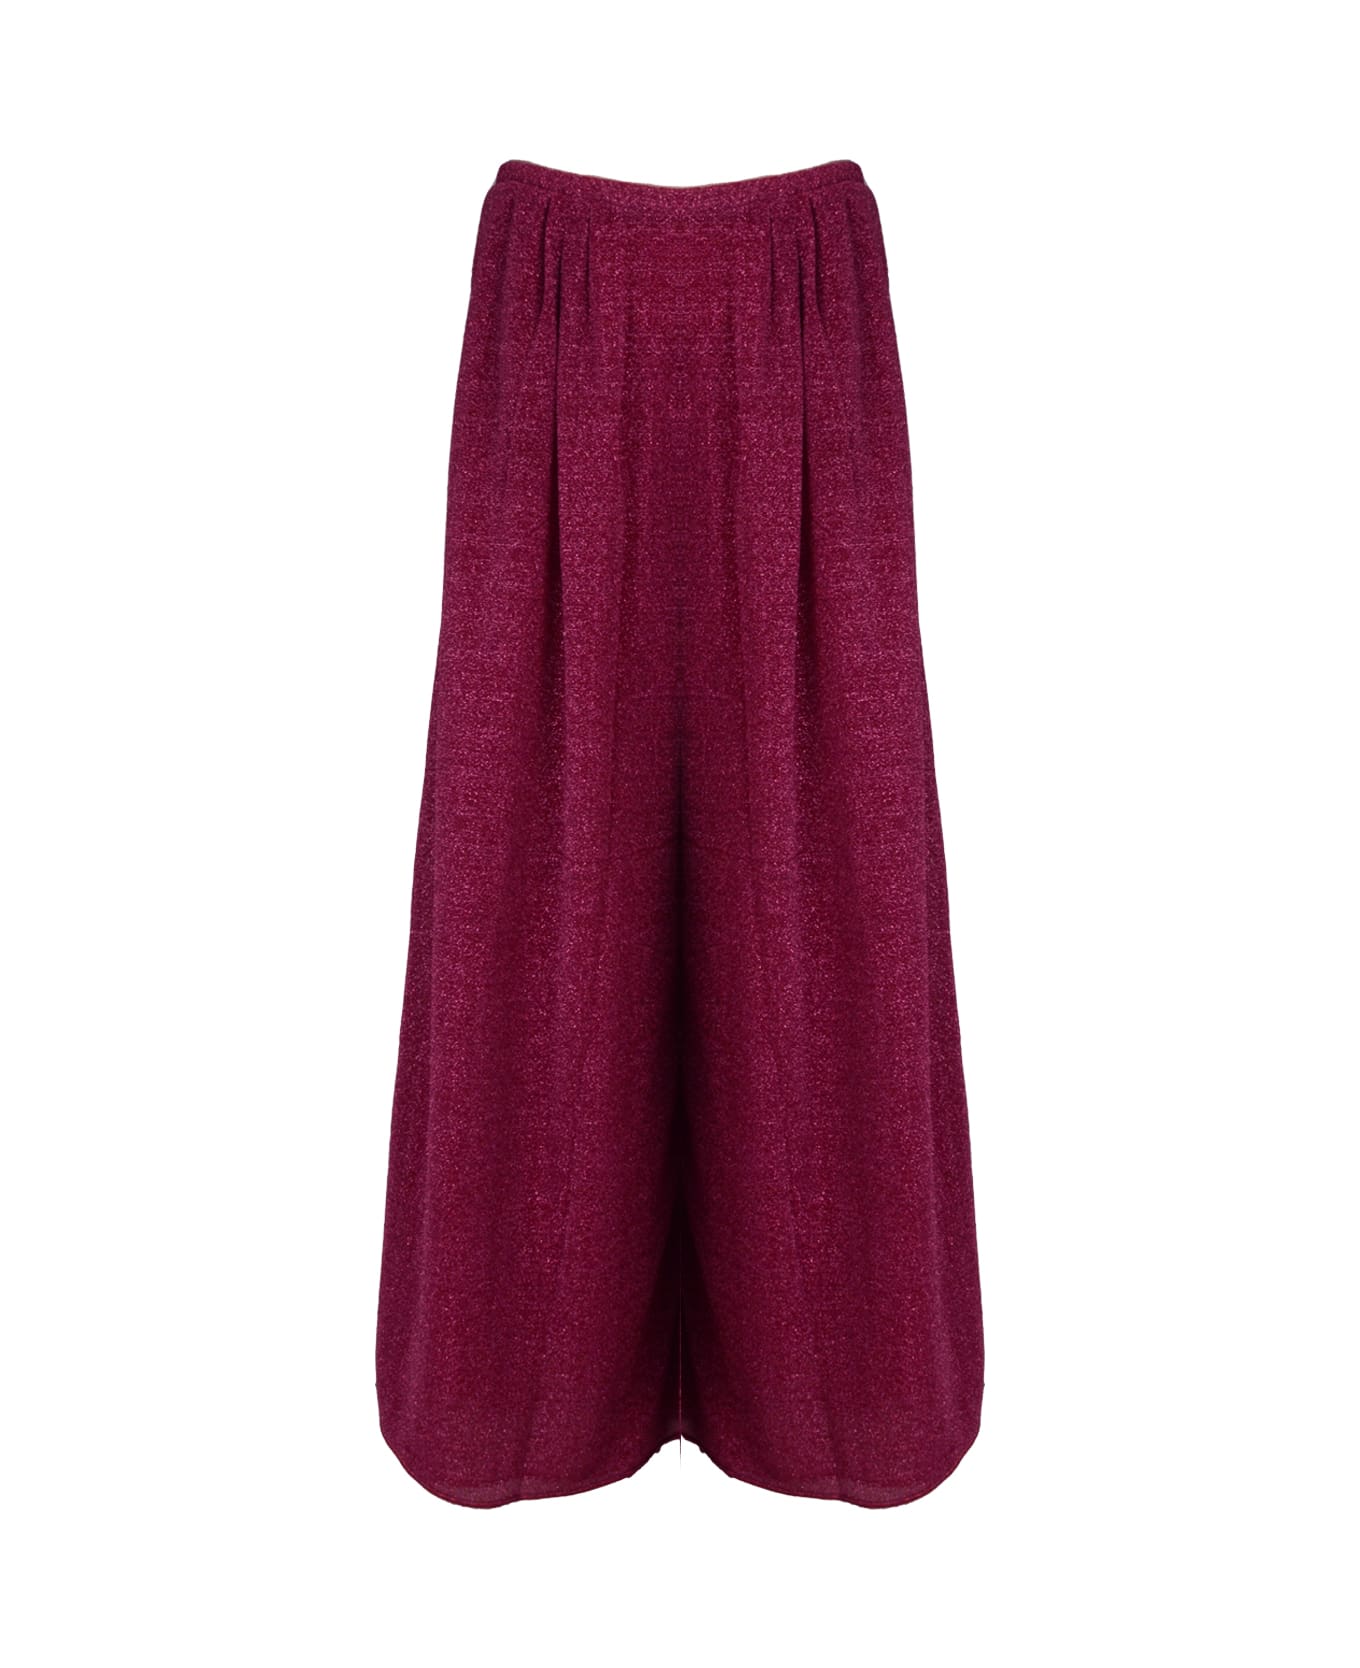 Oseree Pants - Red ボトムス